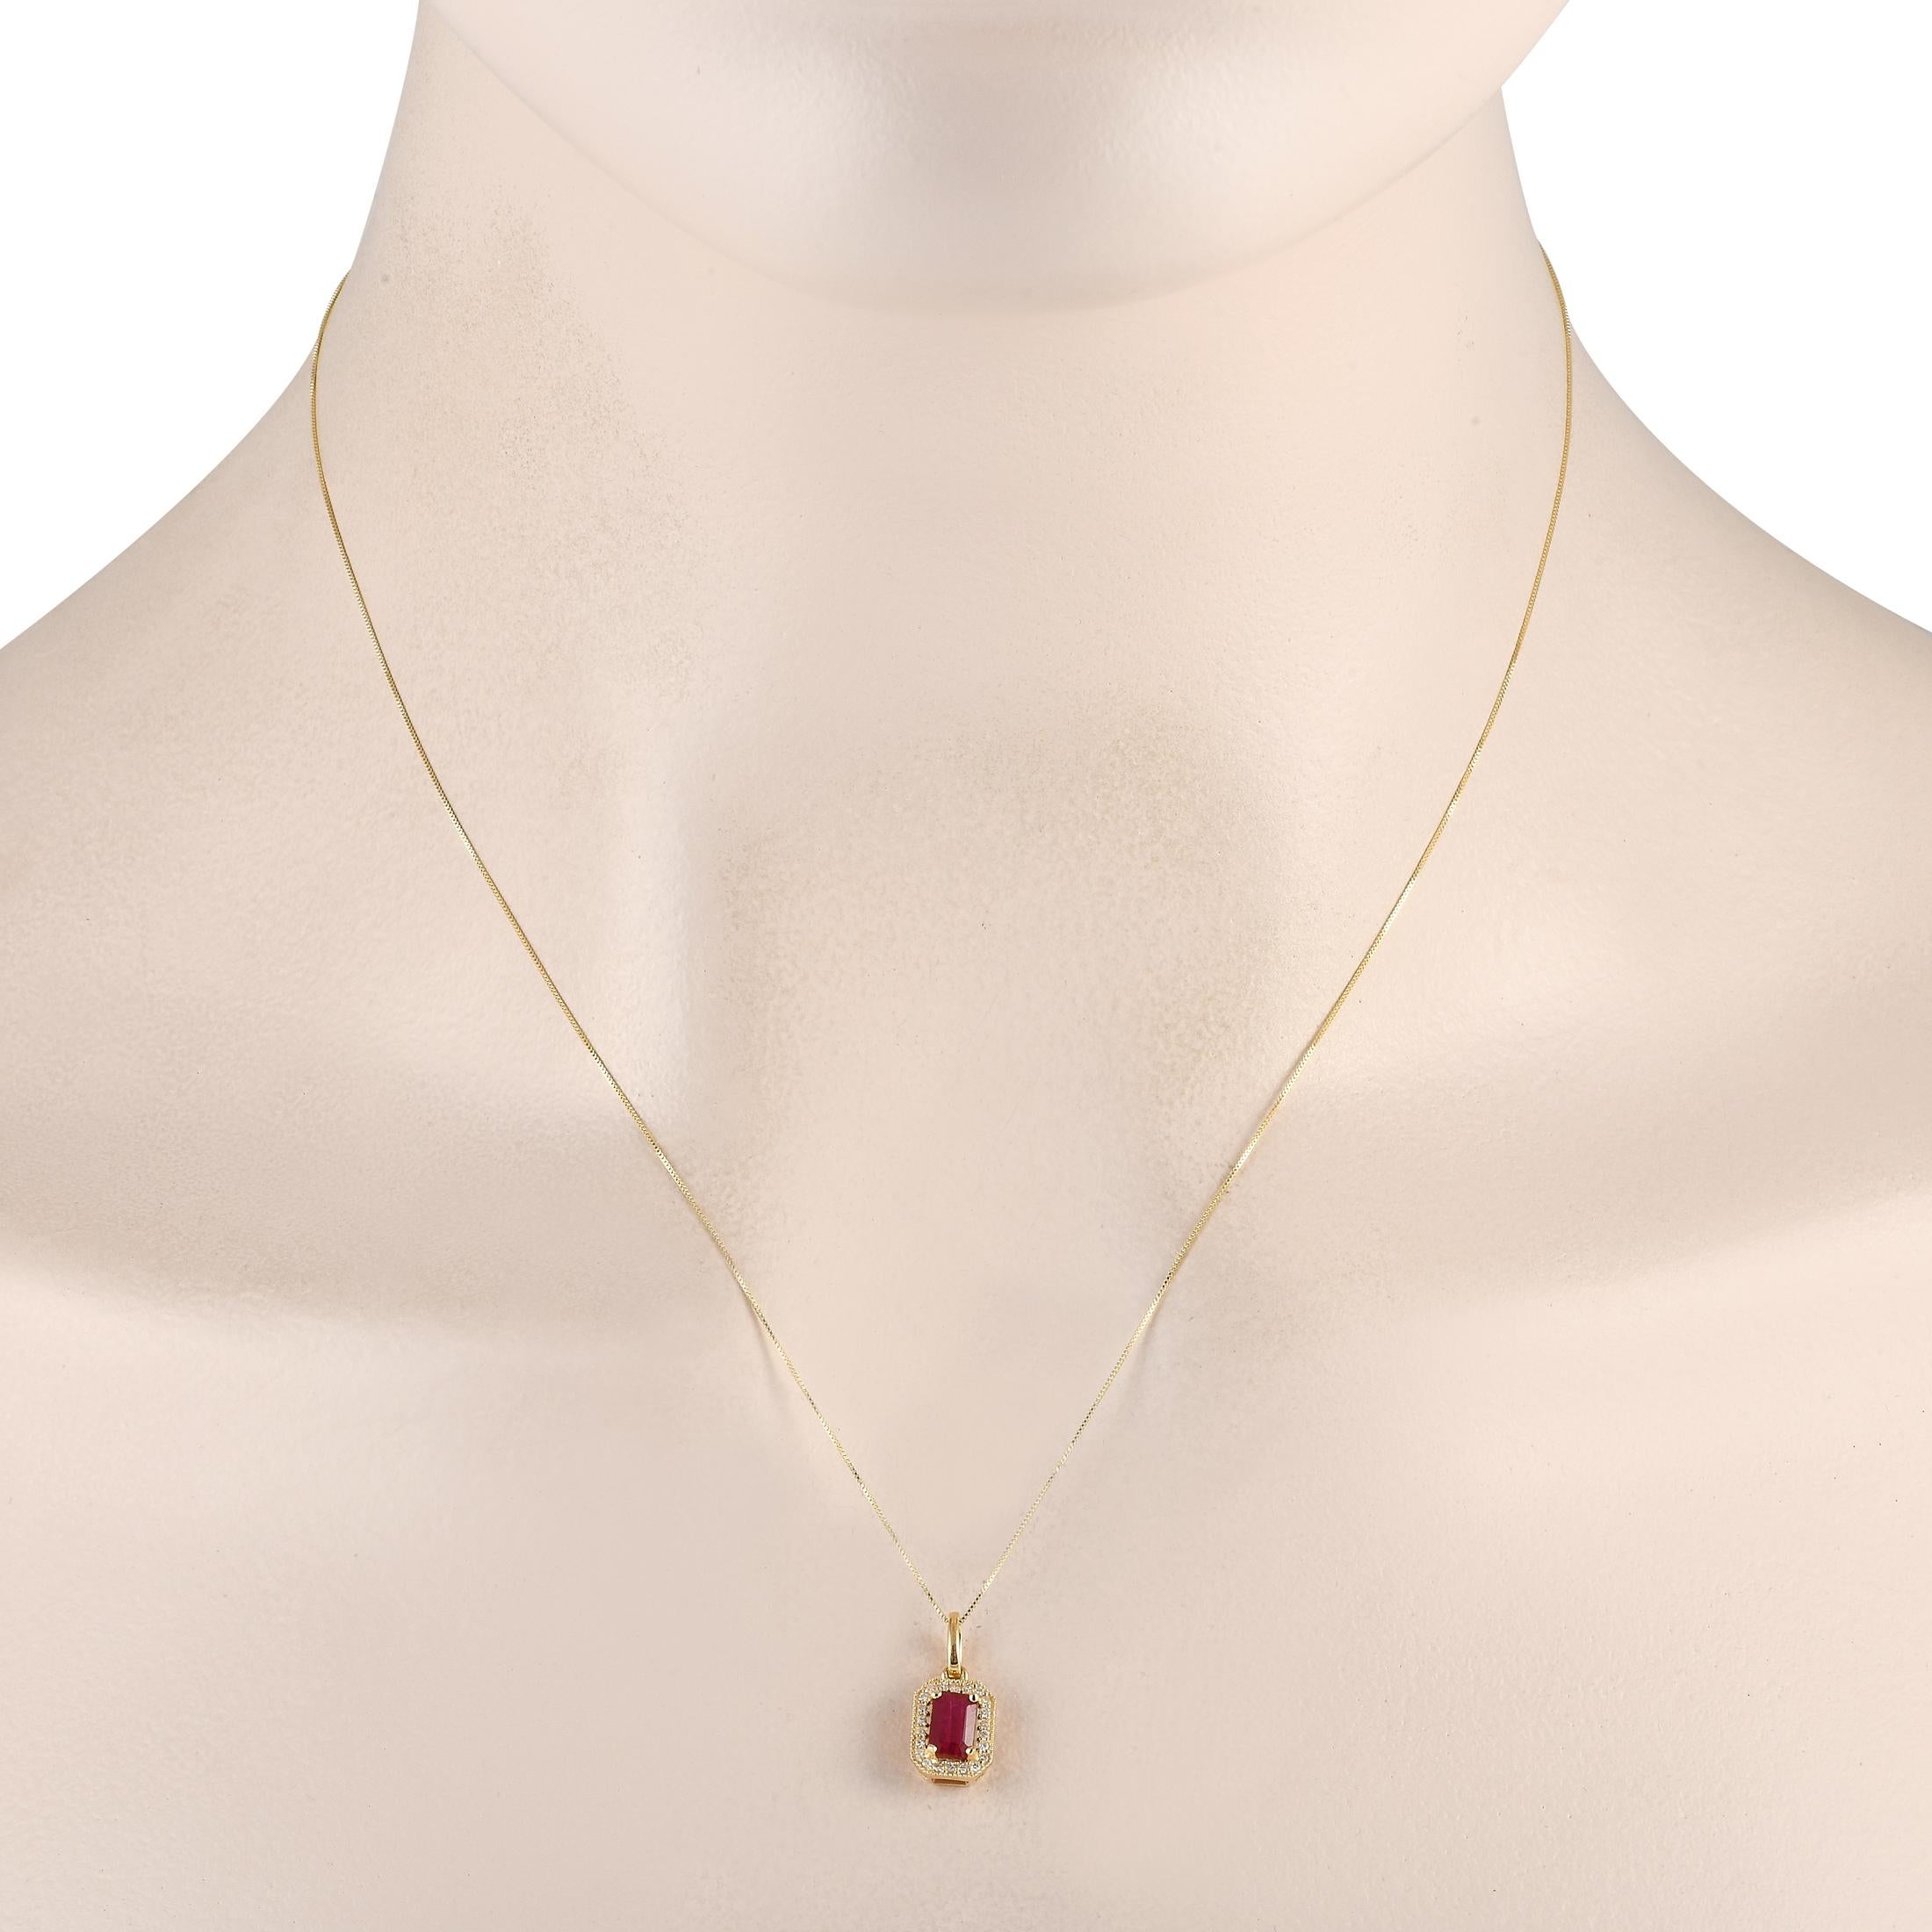 This simple, elegant necklace is nothing short of breathtaking. On the opulent 14K yellow gold pendant  which measures 0.65 long by 0.25 wide  youll find a radiant ruby center stone surrounded by diamond accents with a total weight of 0.10 carats.